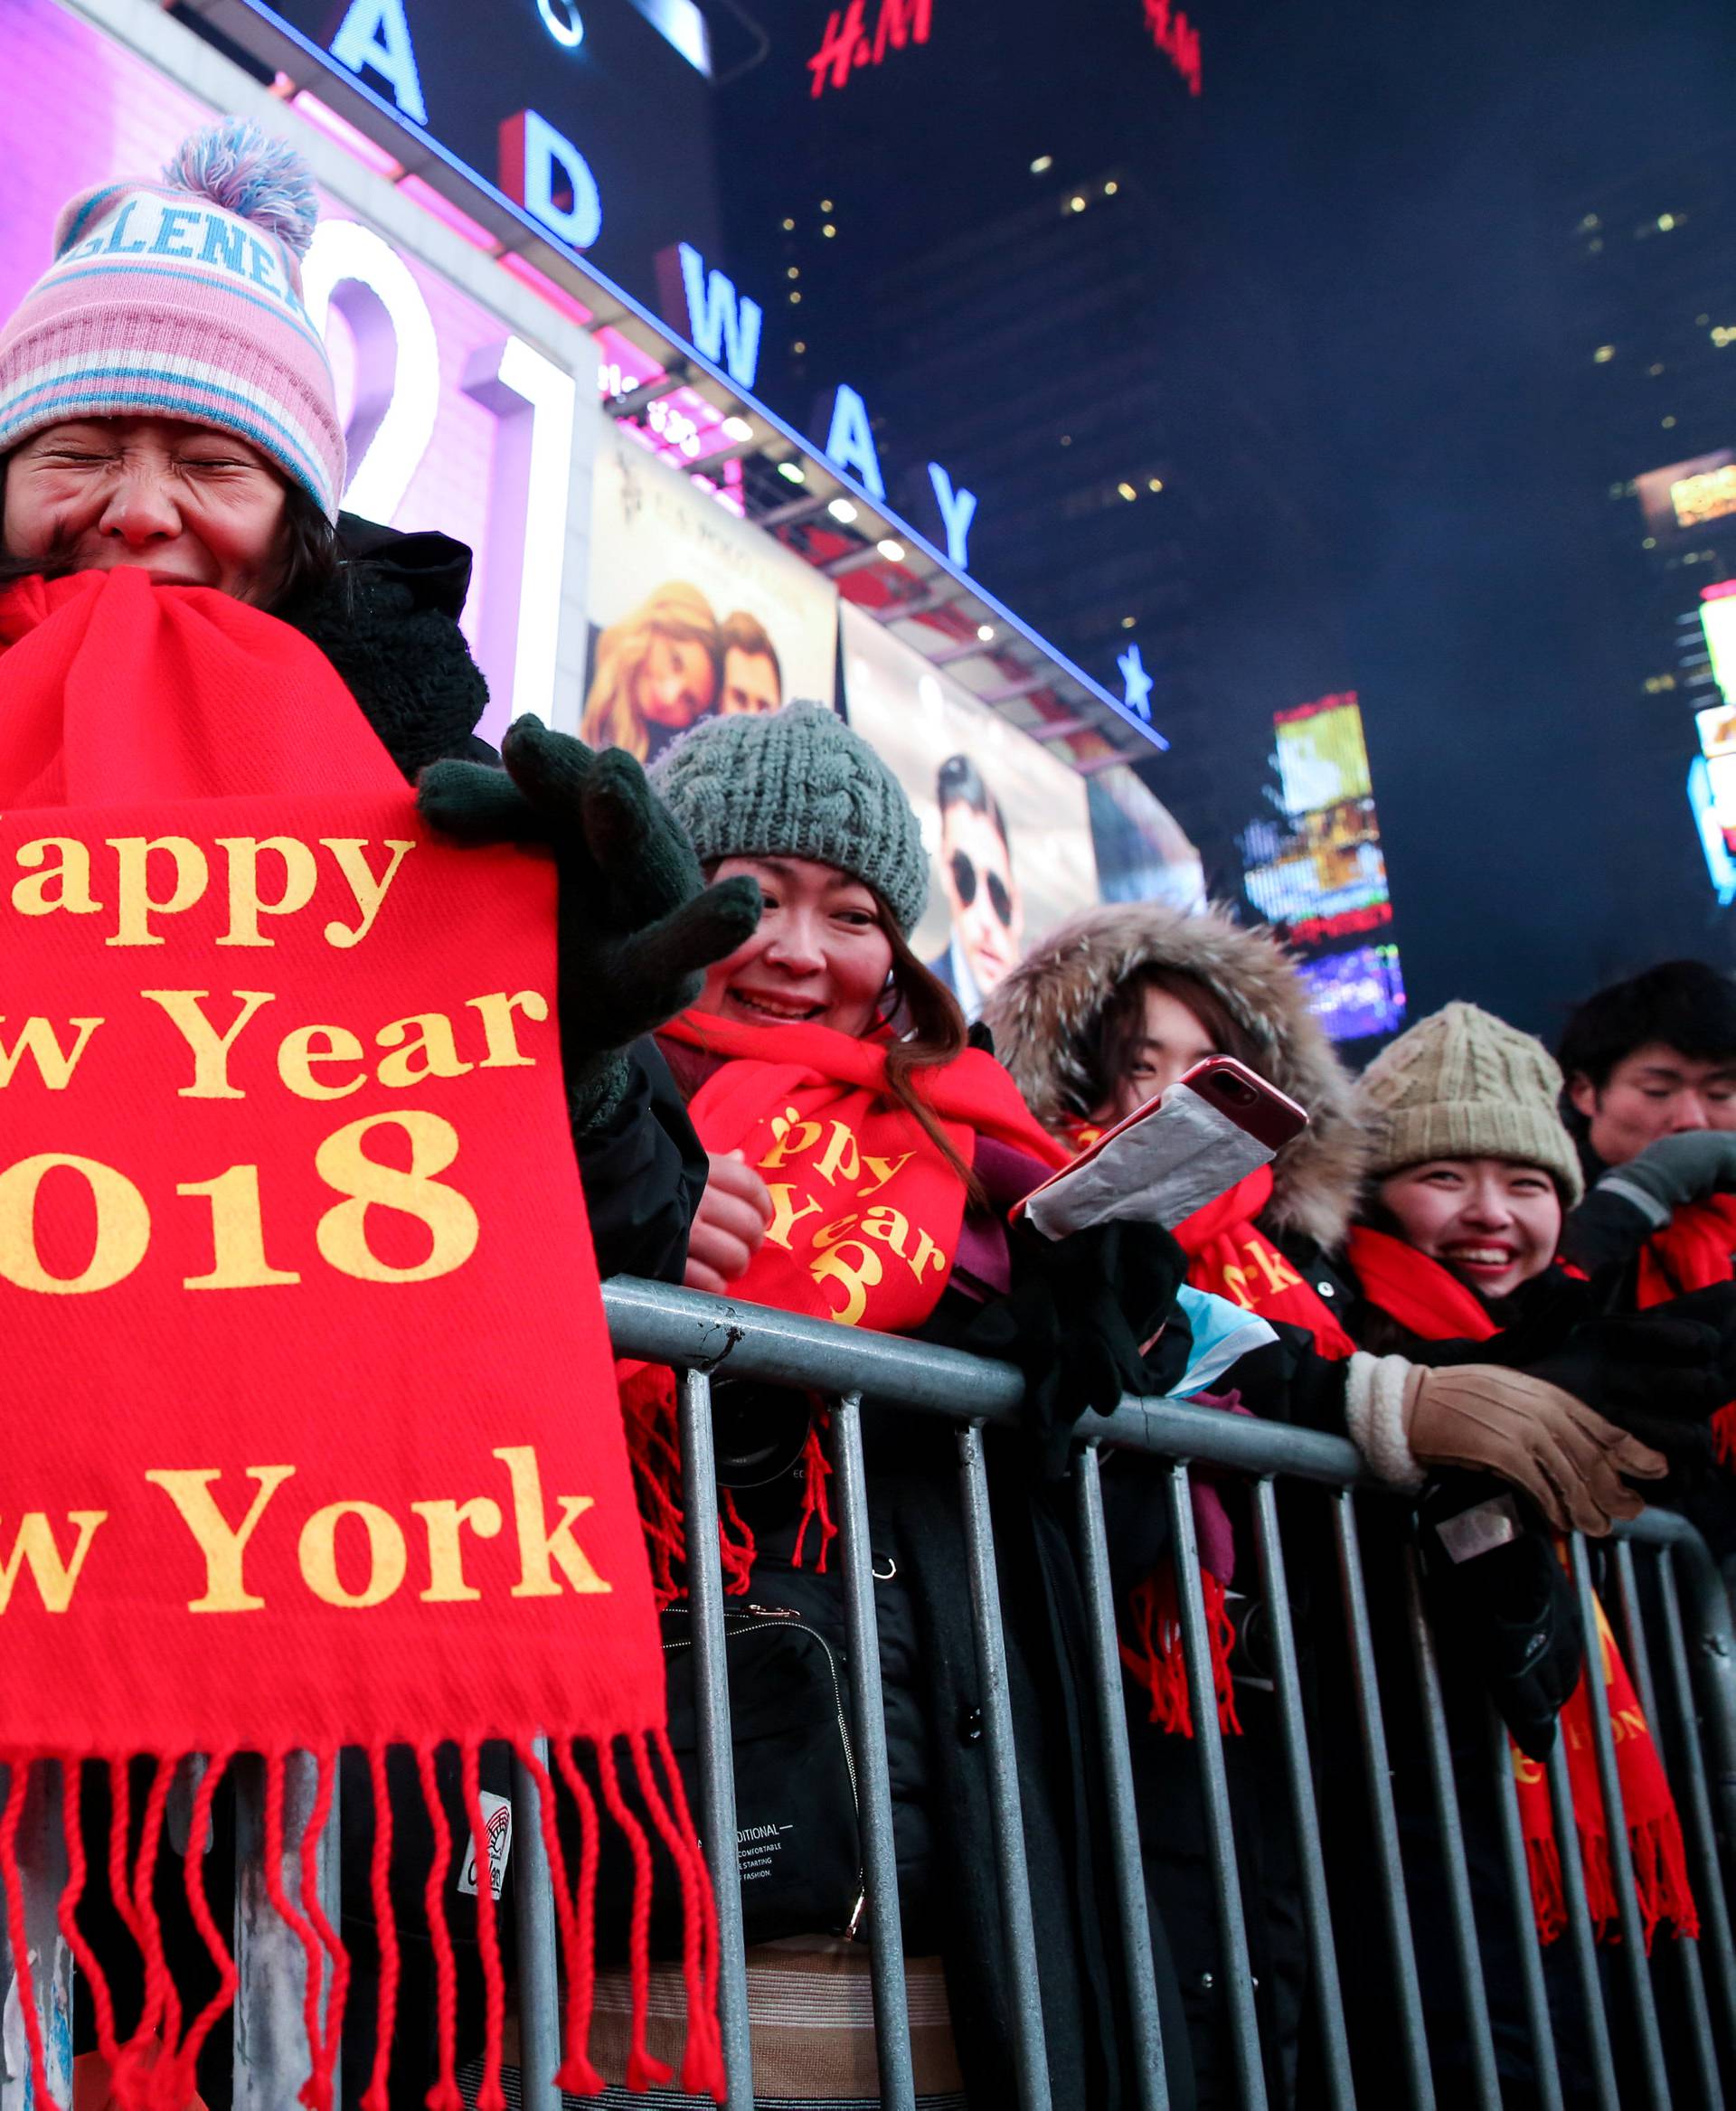 Revelers gather in Times Square ahead of the New Year's Eve celebrations in New York